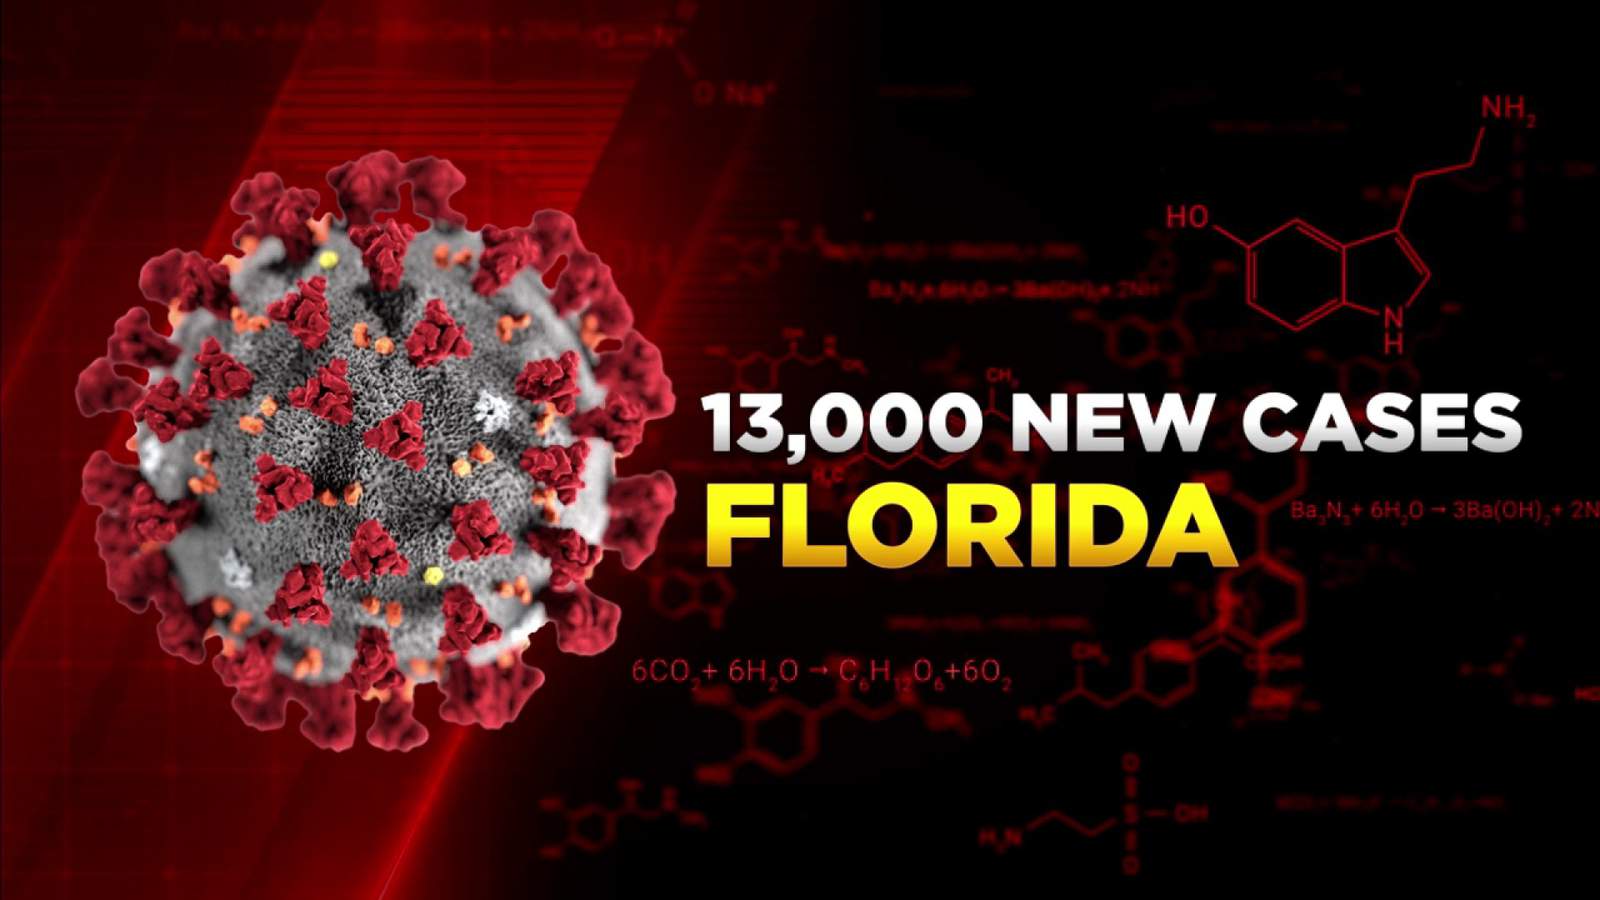 Florida reports 13,000 new coronavirus cases Friday, nearly matching previous day